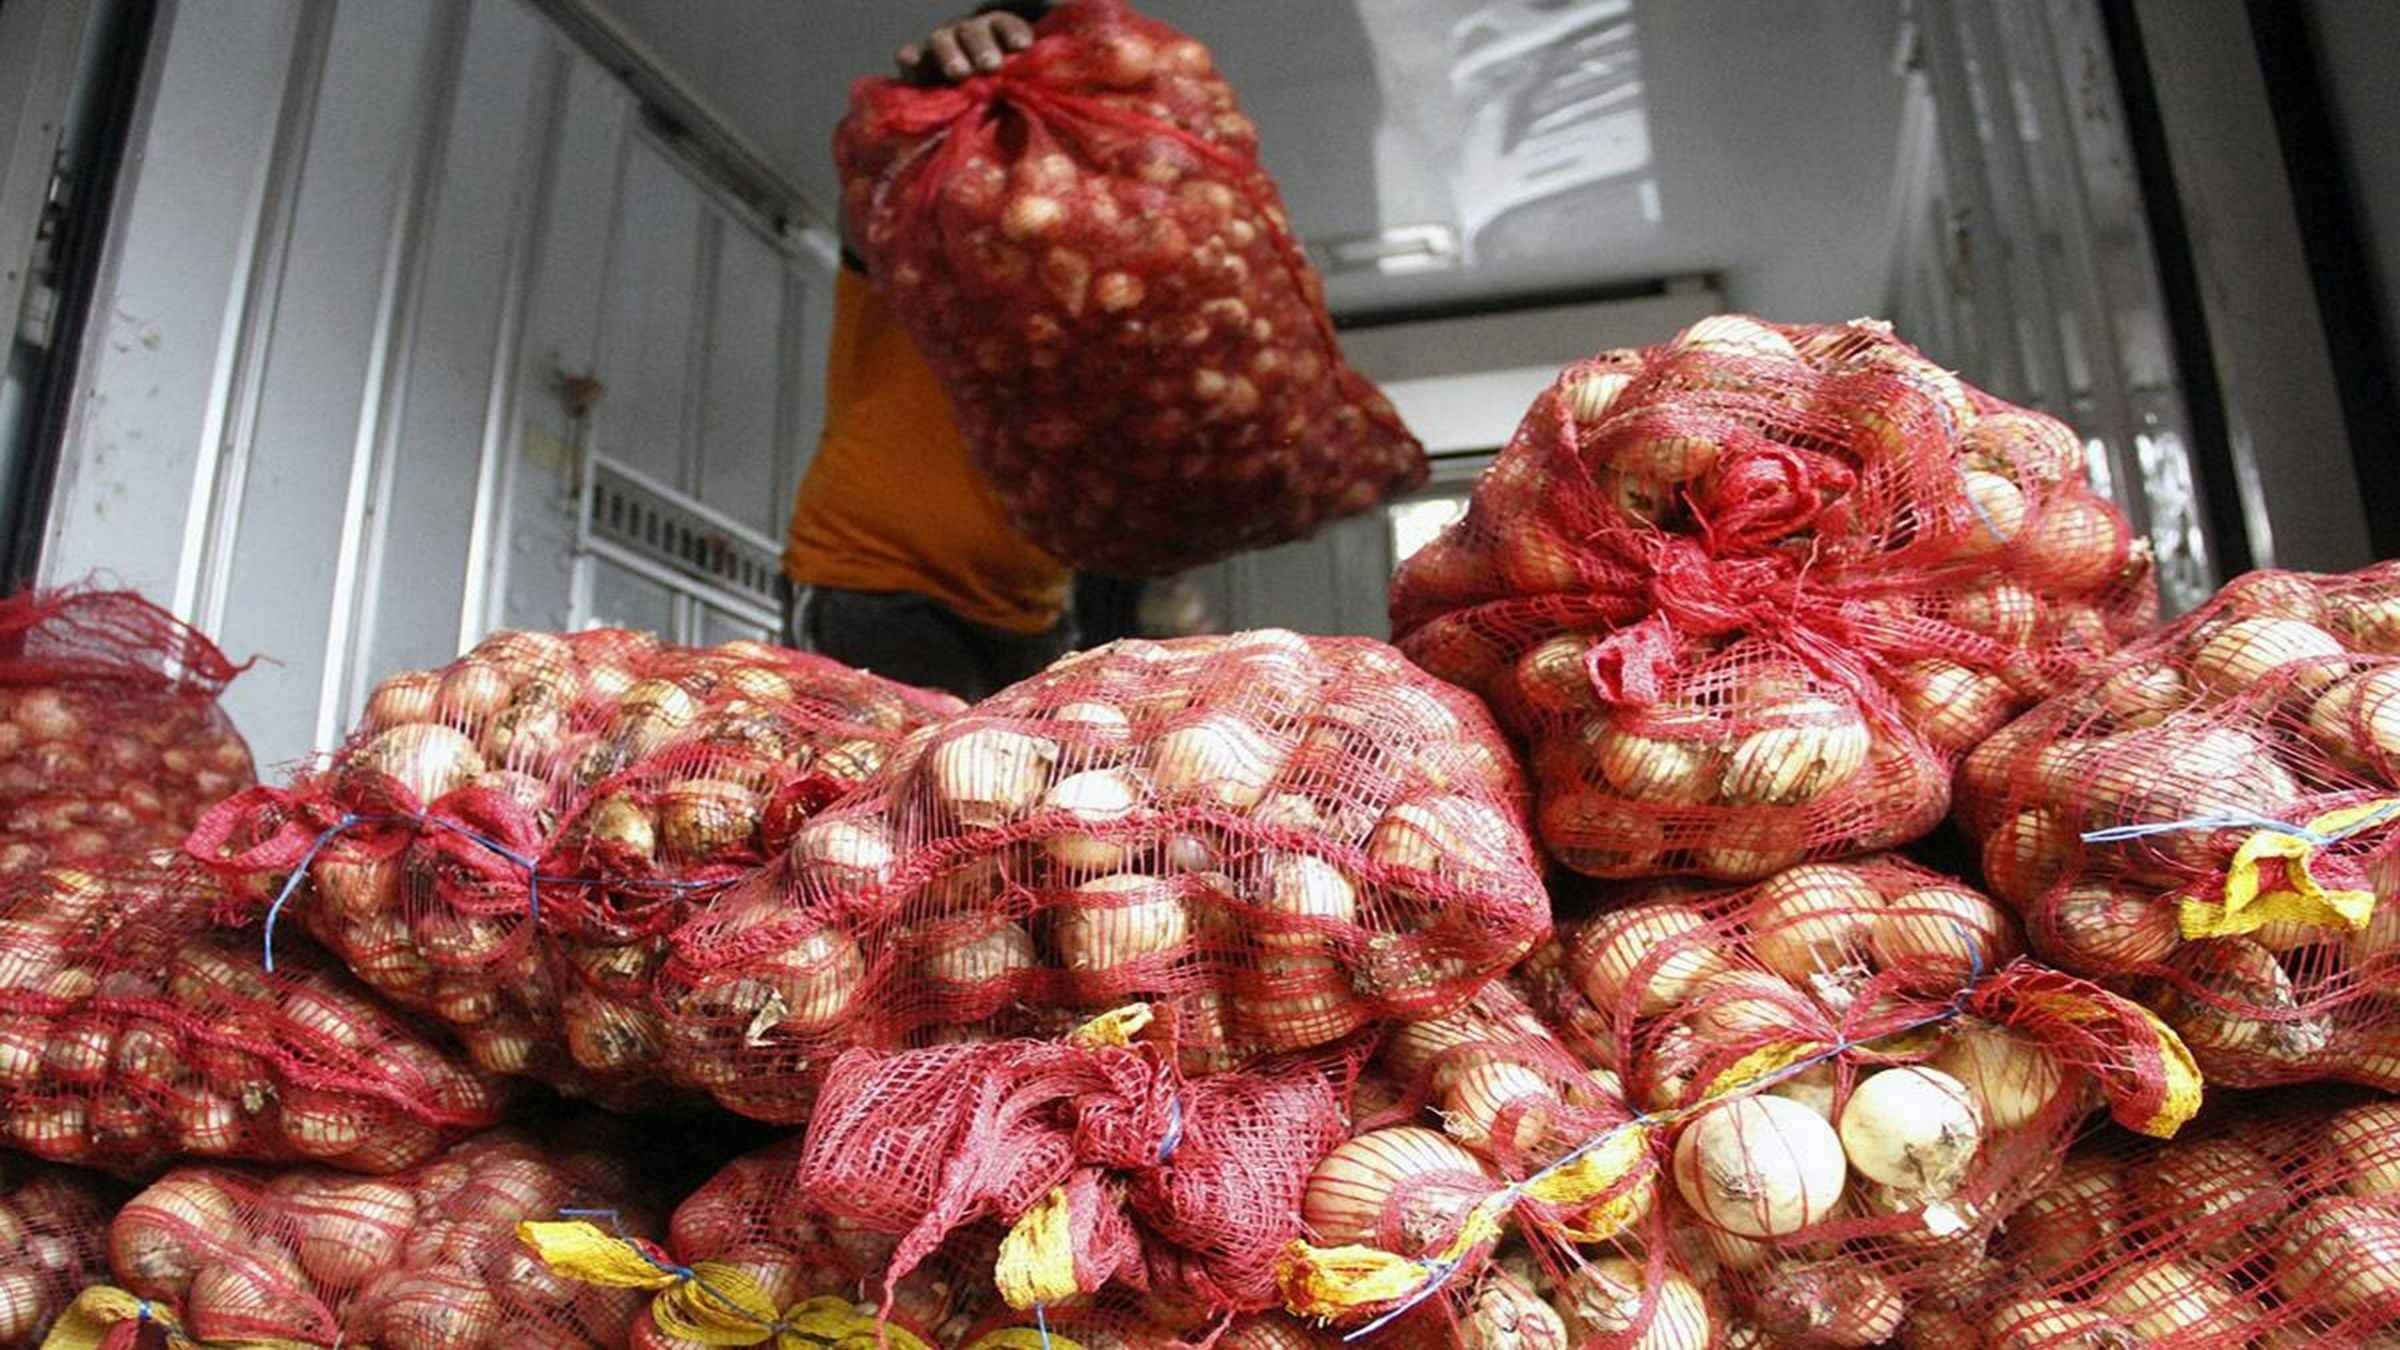 Stringent onion import rules caused weak appetite for importers